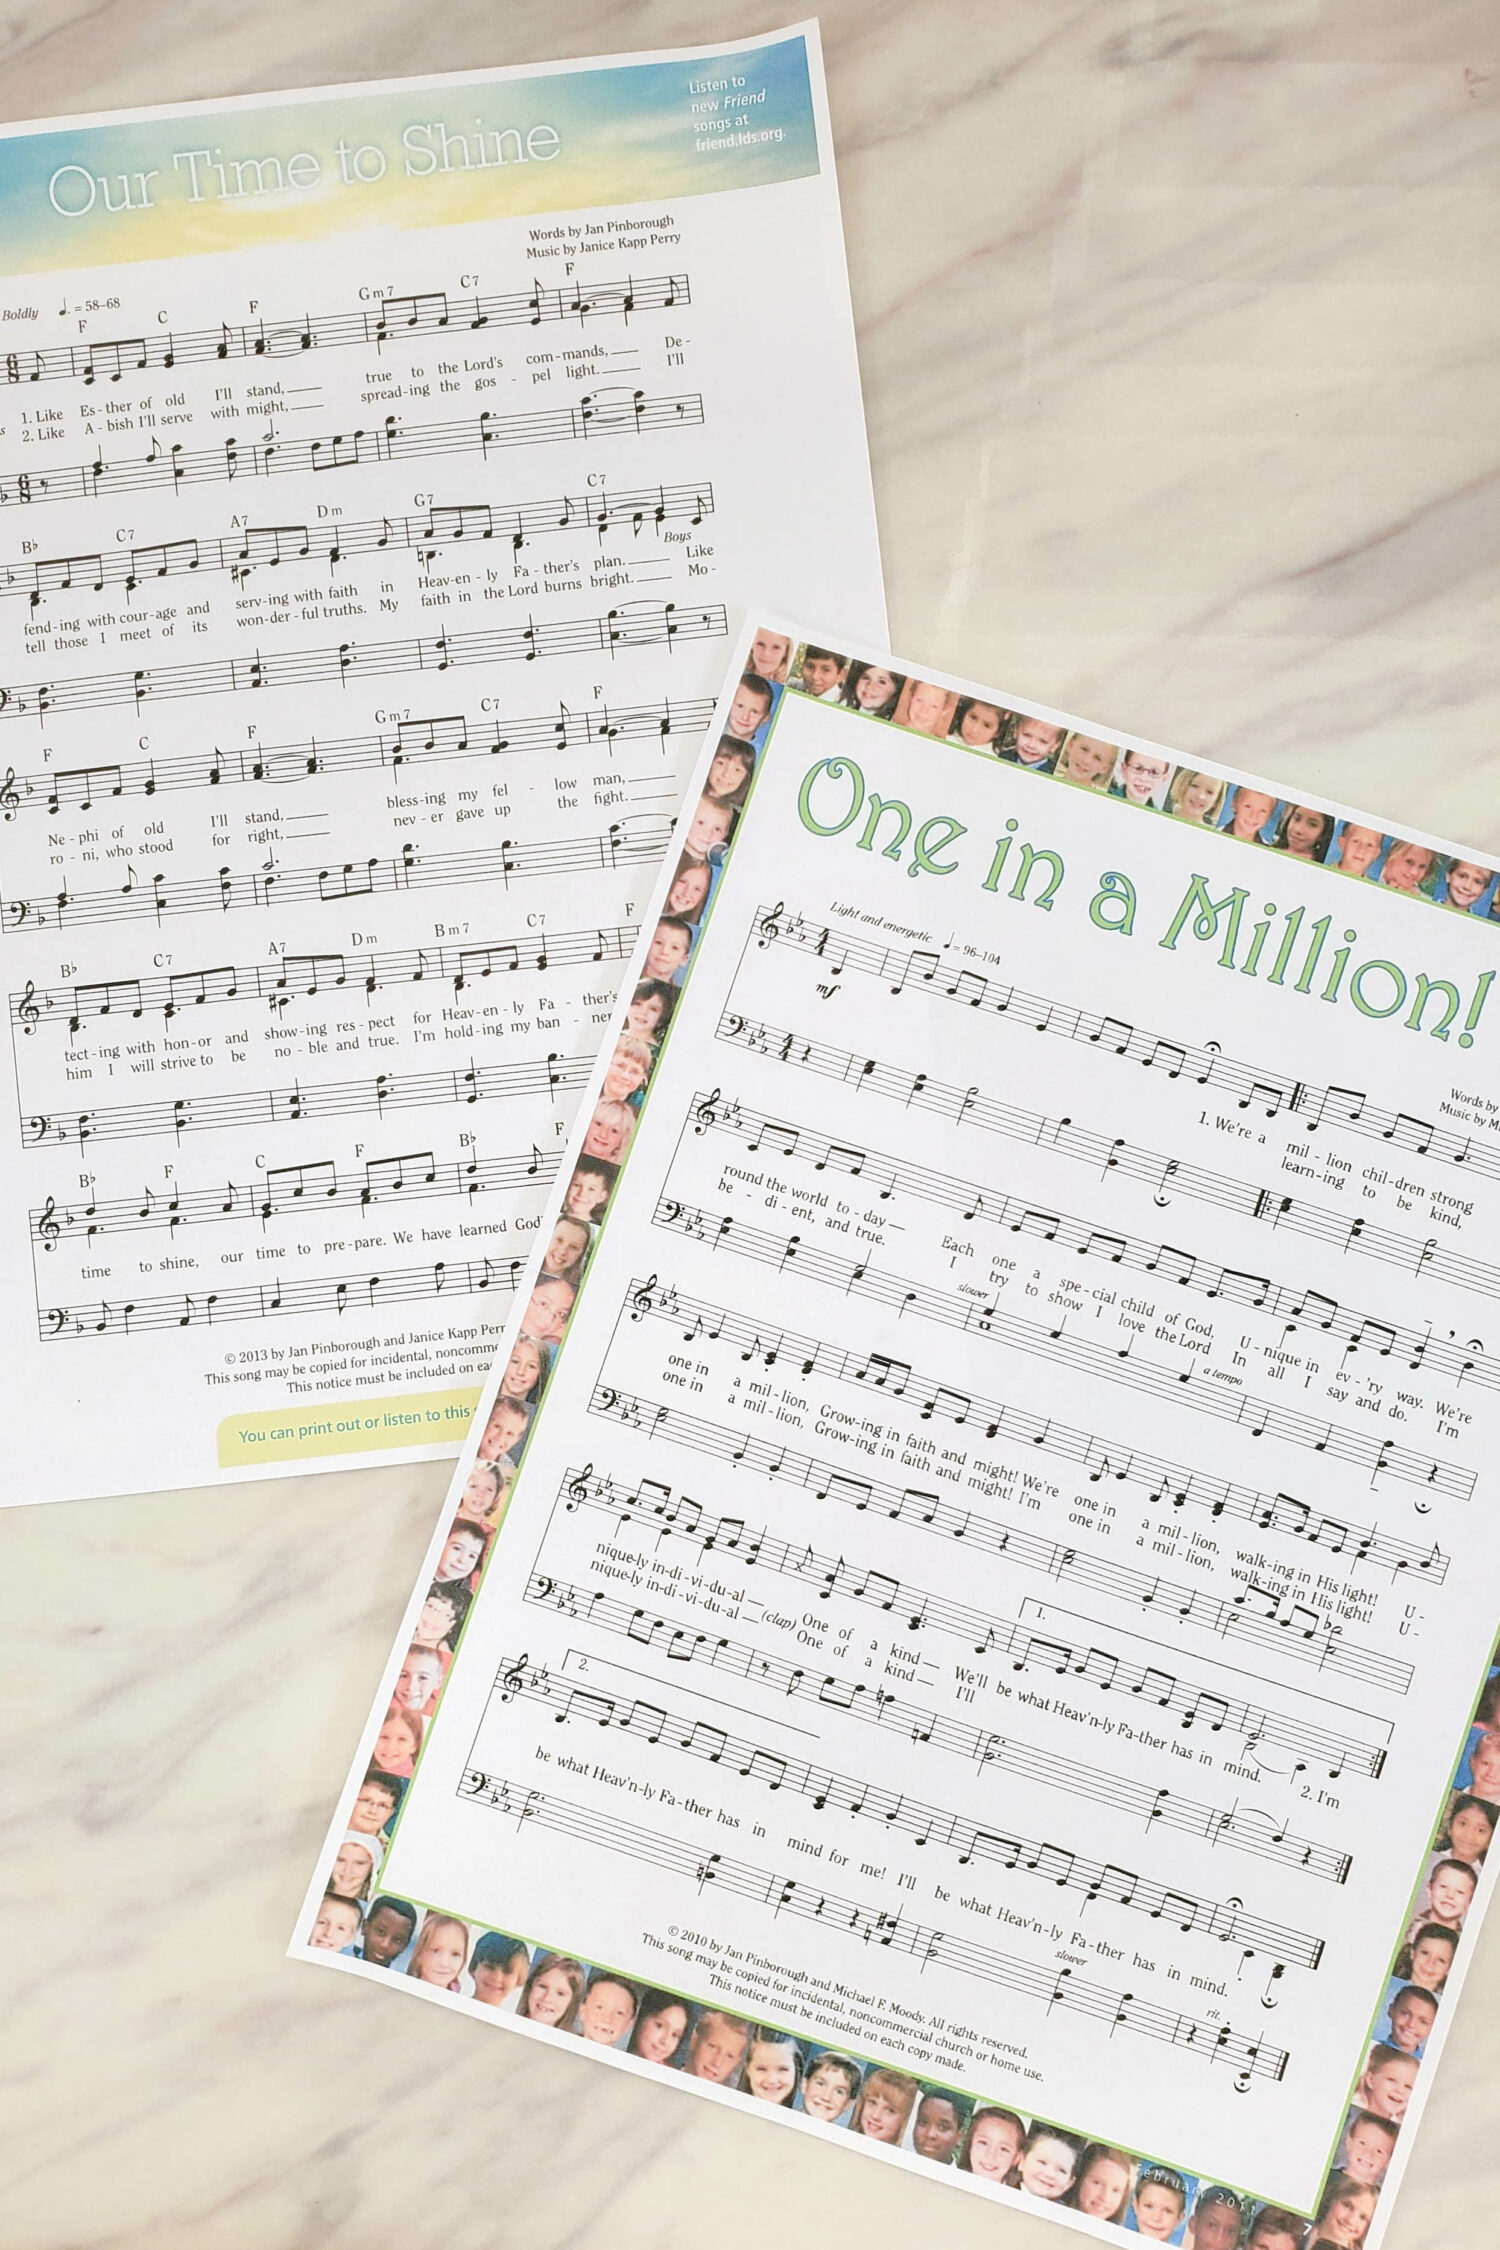 NEW Primary songs and sheet music from songs published in the Friend magazine and are considered pre-approved to teach in LDS Singing Time! So much amazing music to pick from.